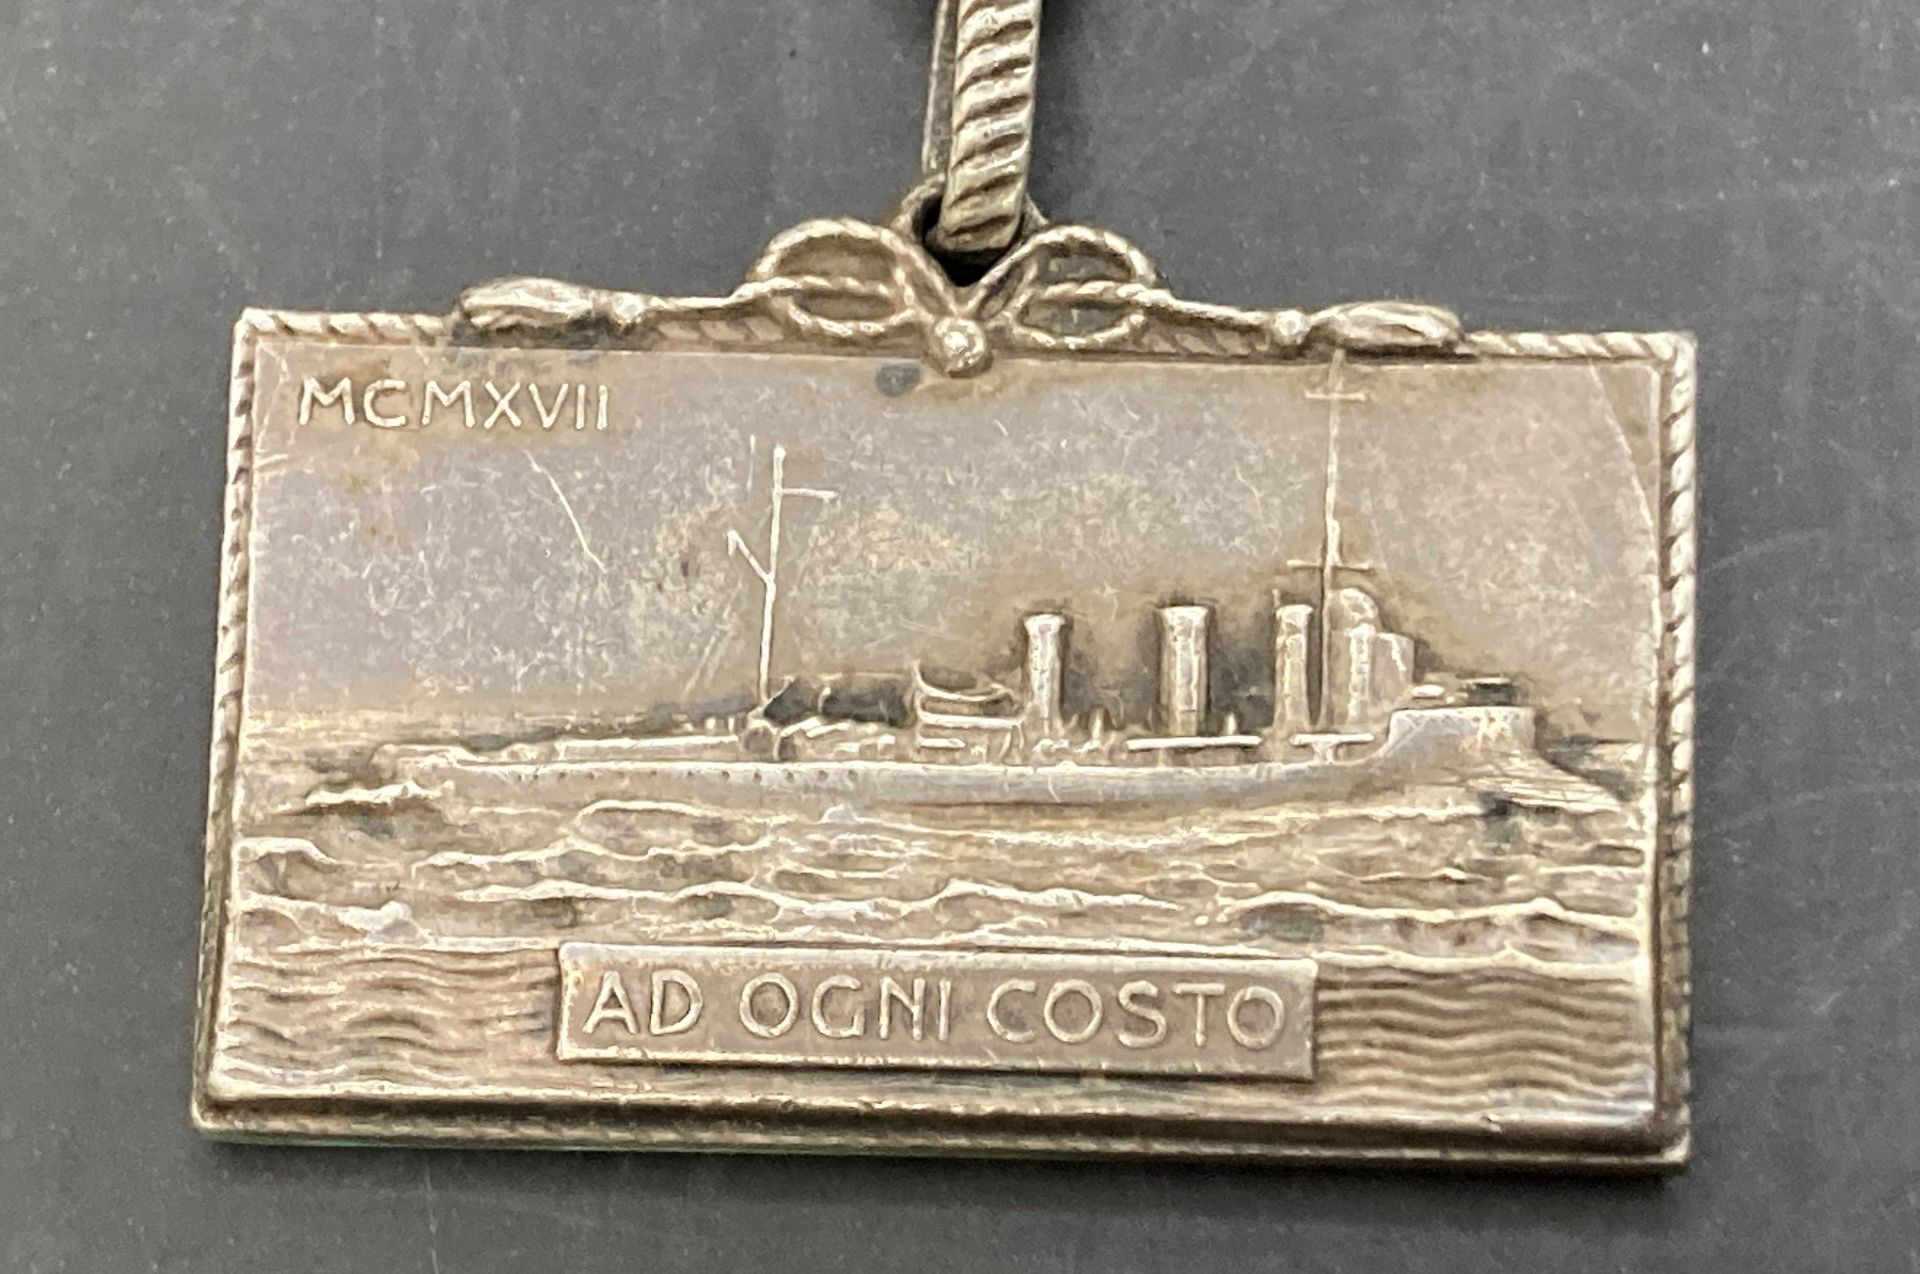 Un-named Medal for the World War One Italian Destroyer RM GUISEPPE SIRTORI. - Image 2 of 3